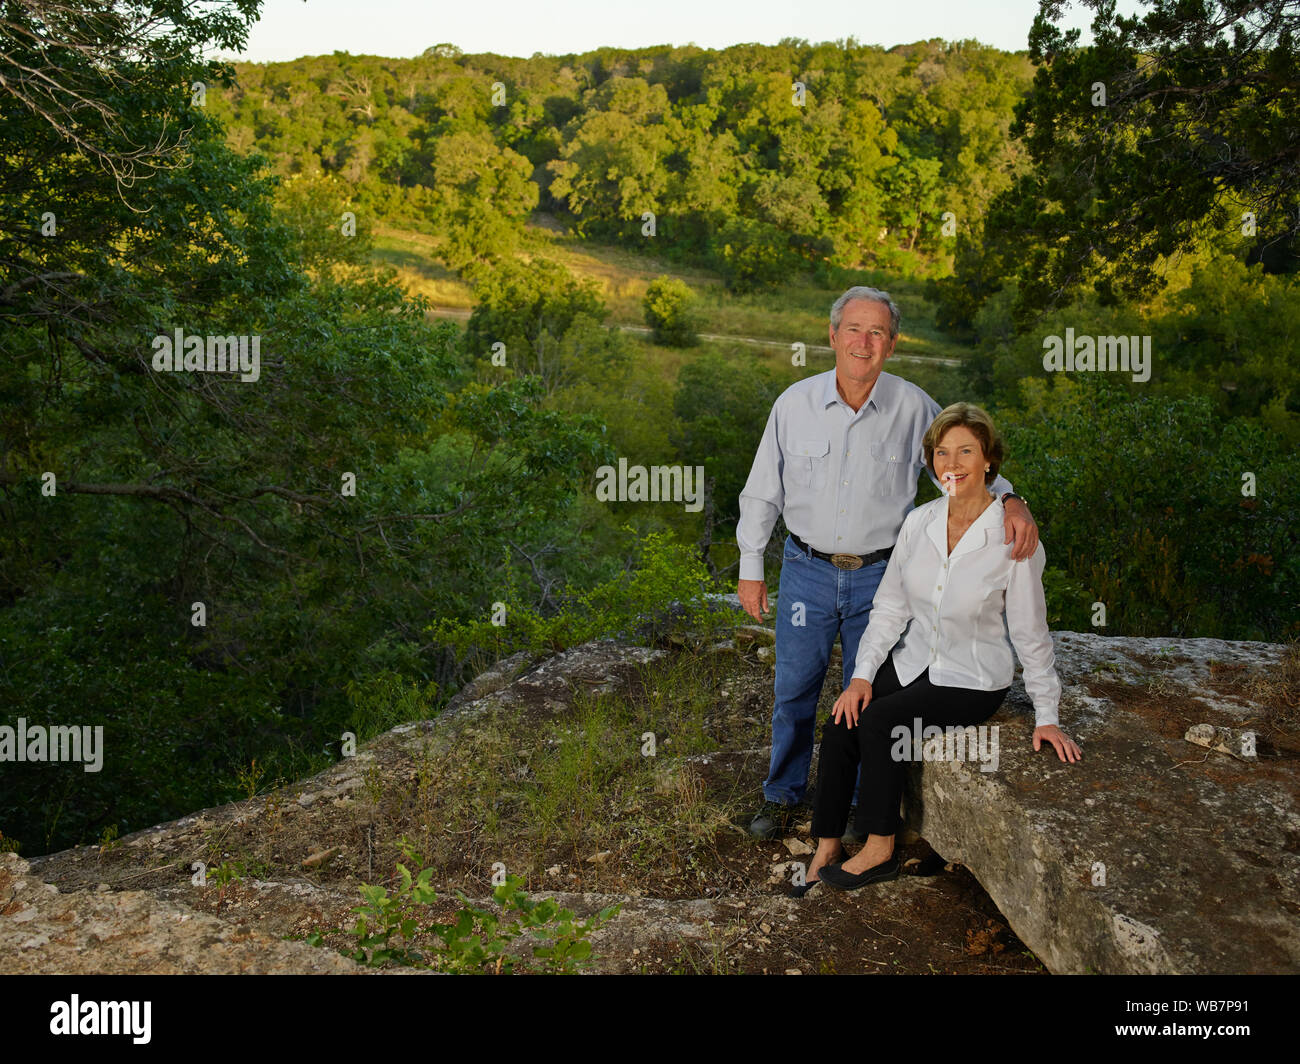 Former U.S. President George W. Bush and former first lady Laura Bush at one of their favorite overlooks on their 1,600-acre ranch near Crawford in McLennon County, Texas Stock Photo